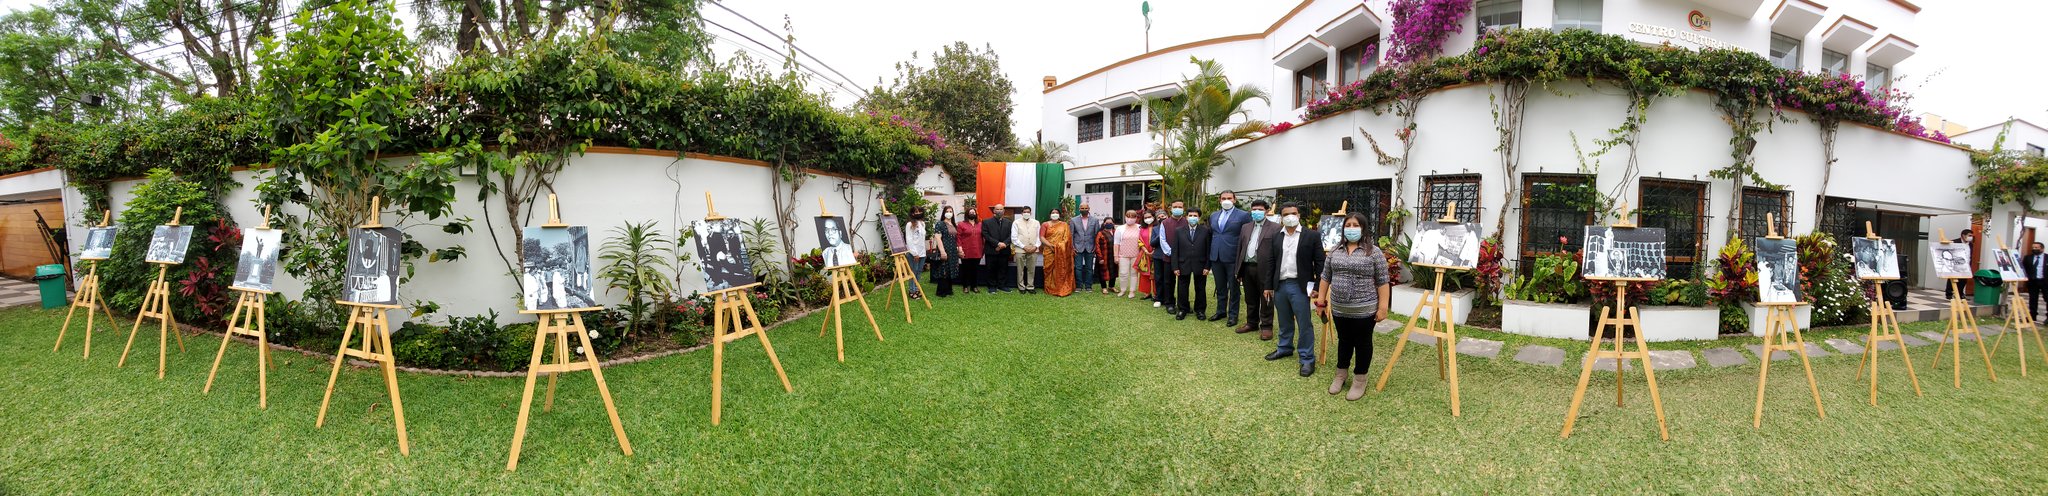 #SamvidhanDiwas 2021 celebrated by @eoilima encompassing reading of the Preamble by employees and families, photo exhibition attended by Indian diaspora and friends of India, talk by distinguished speakers and screening of documentaries